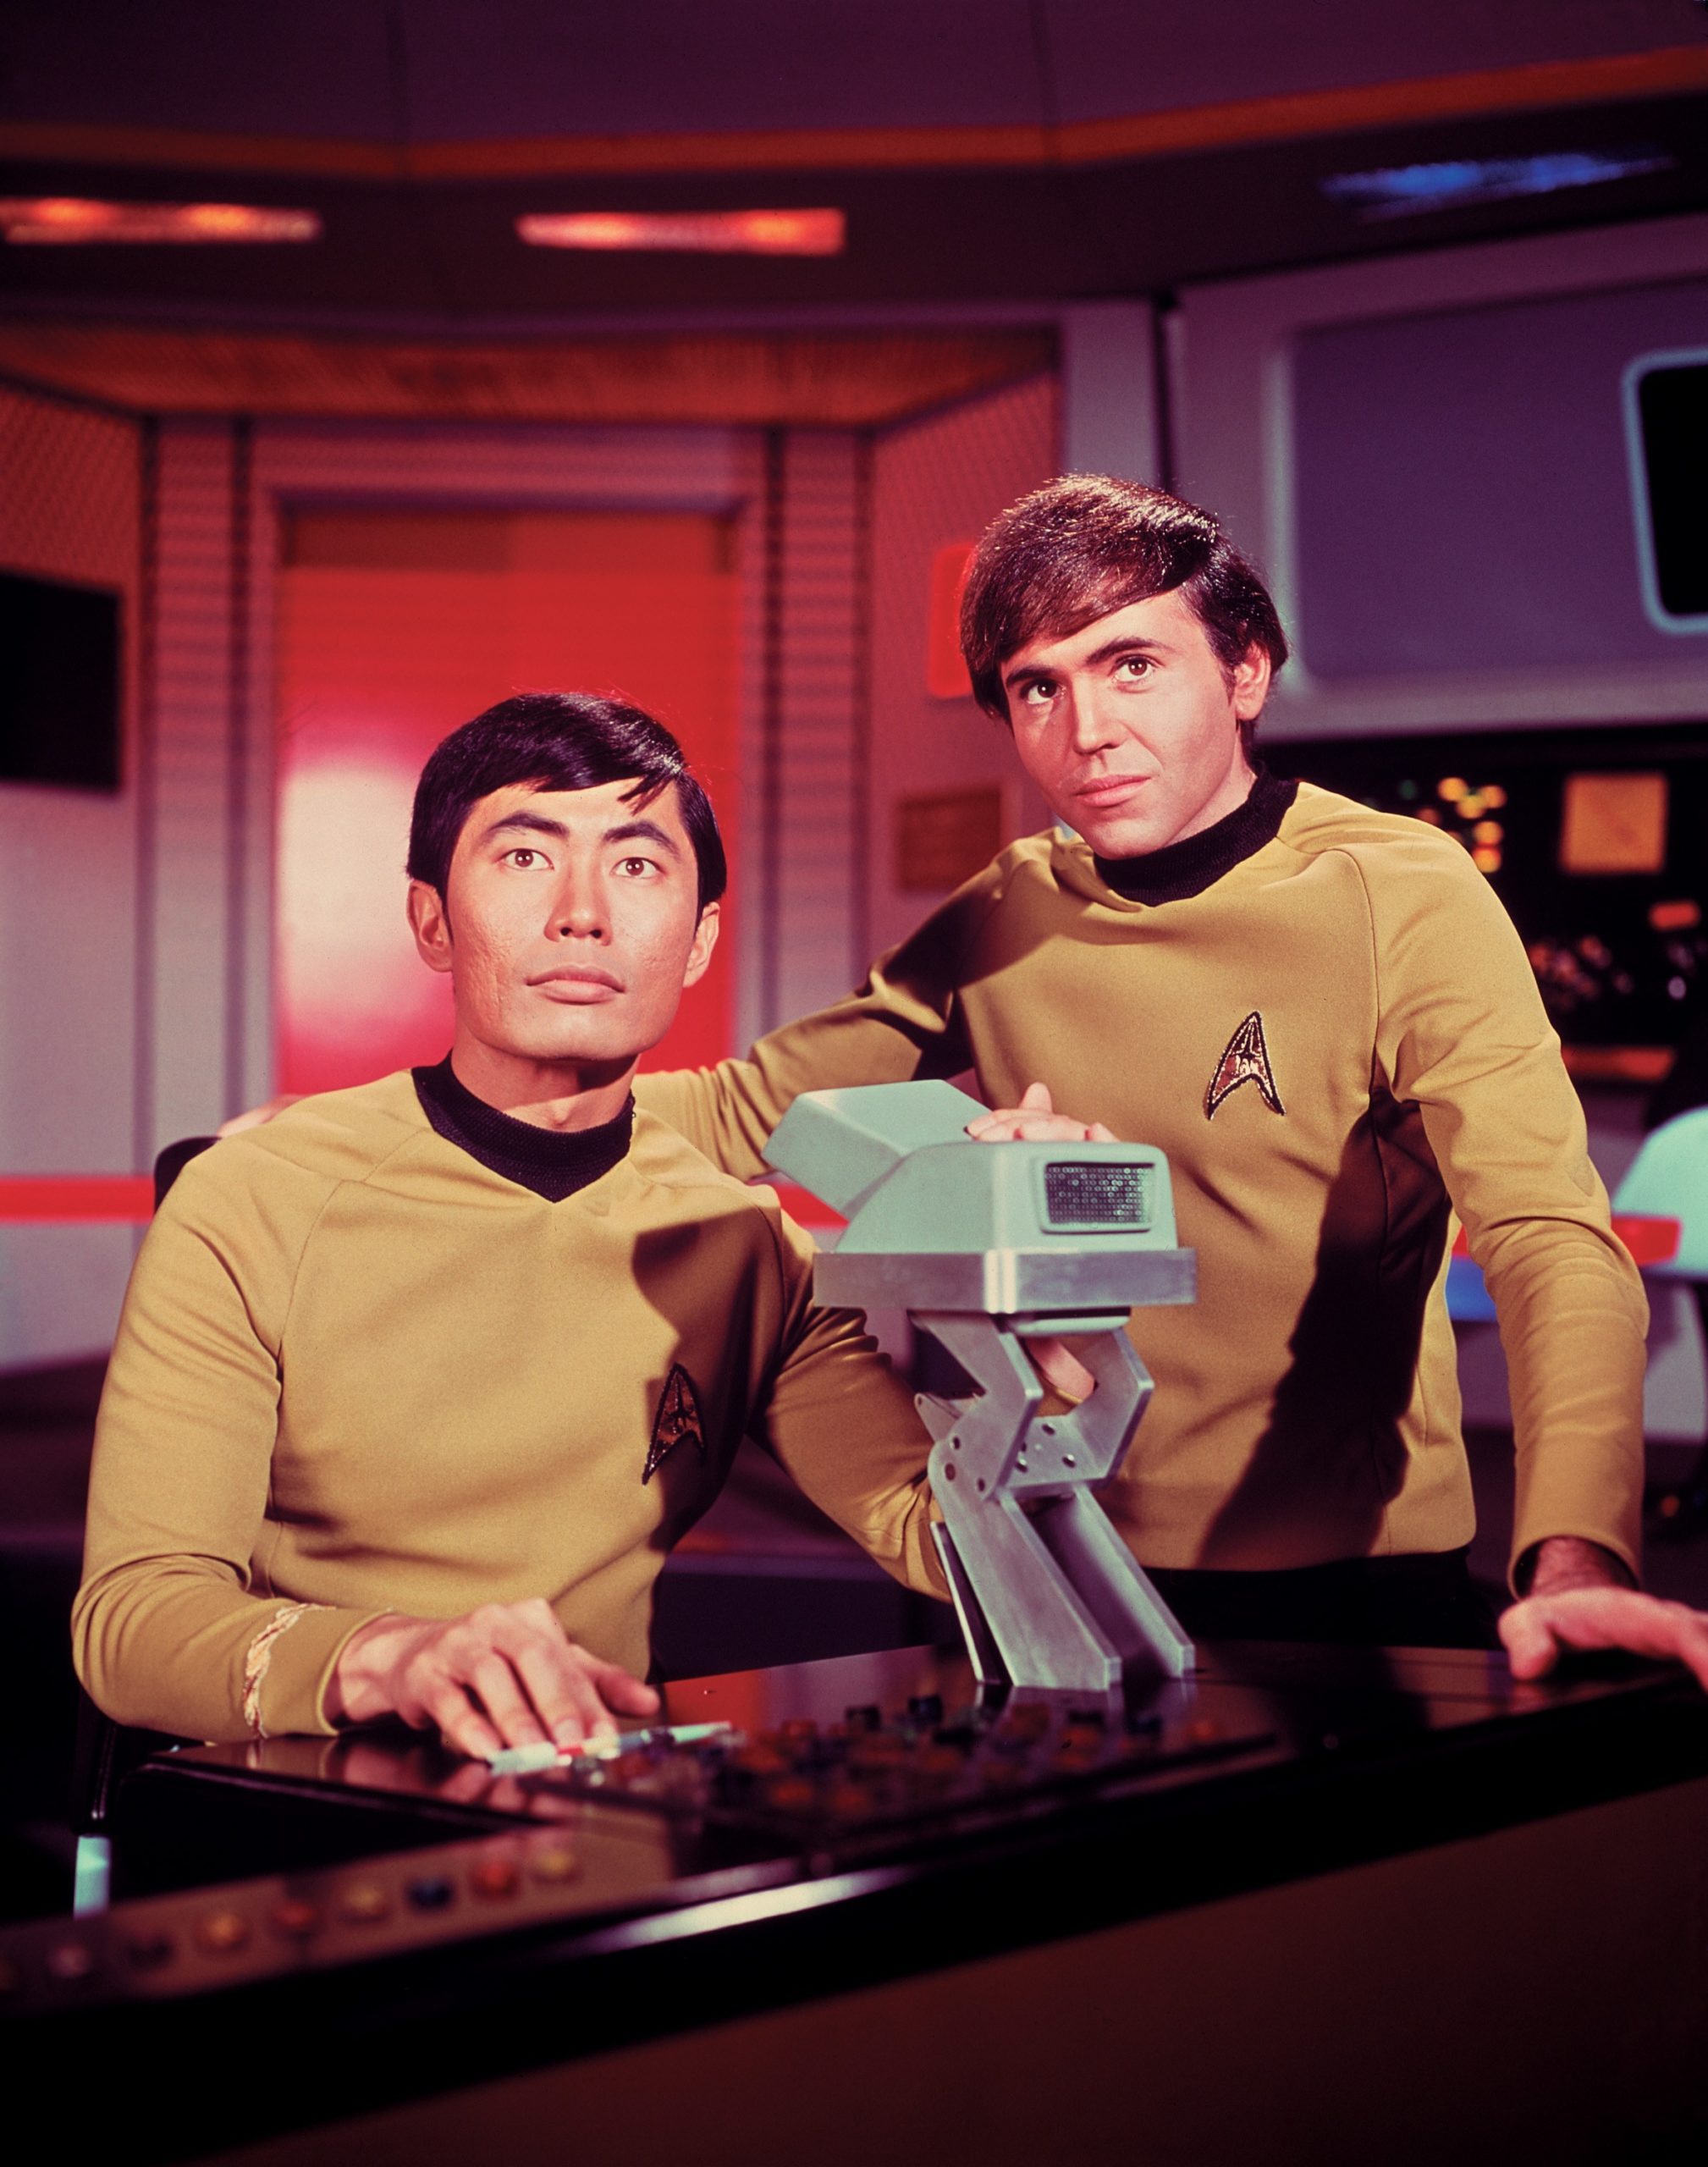 star trek colleague of sulu and spock